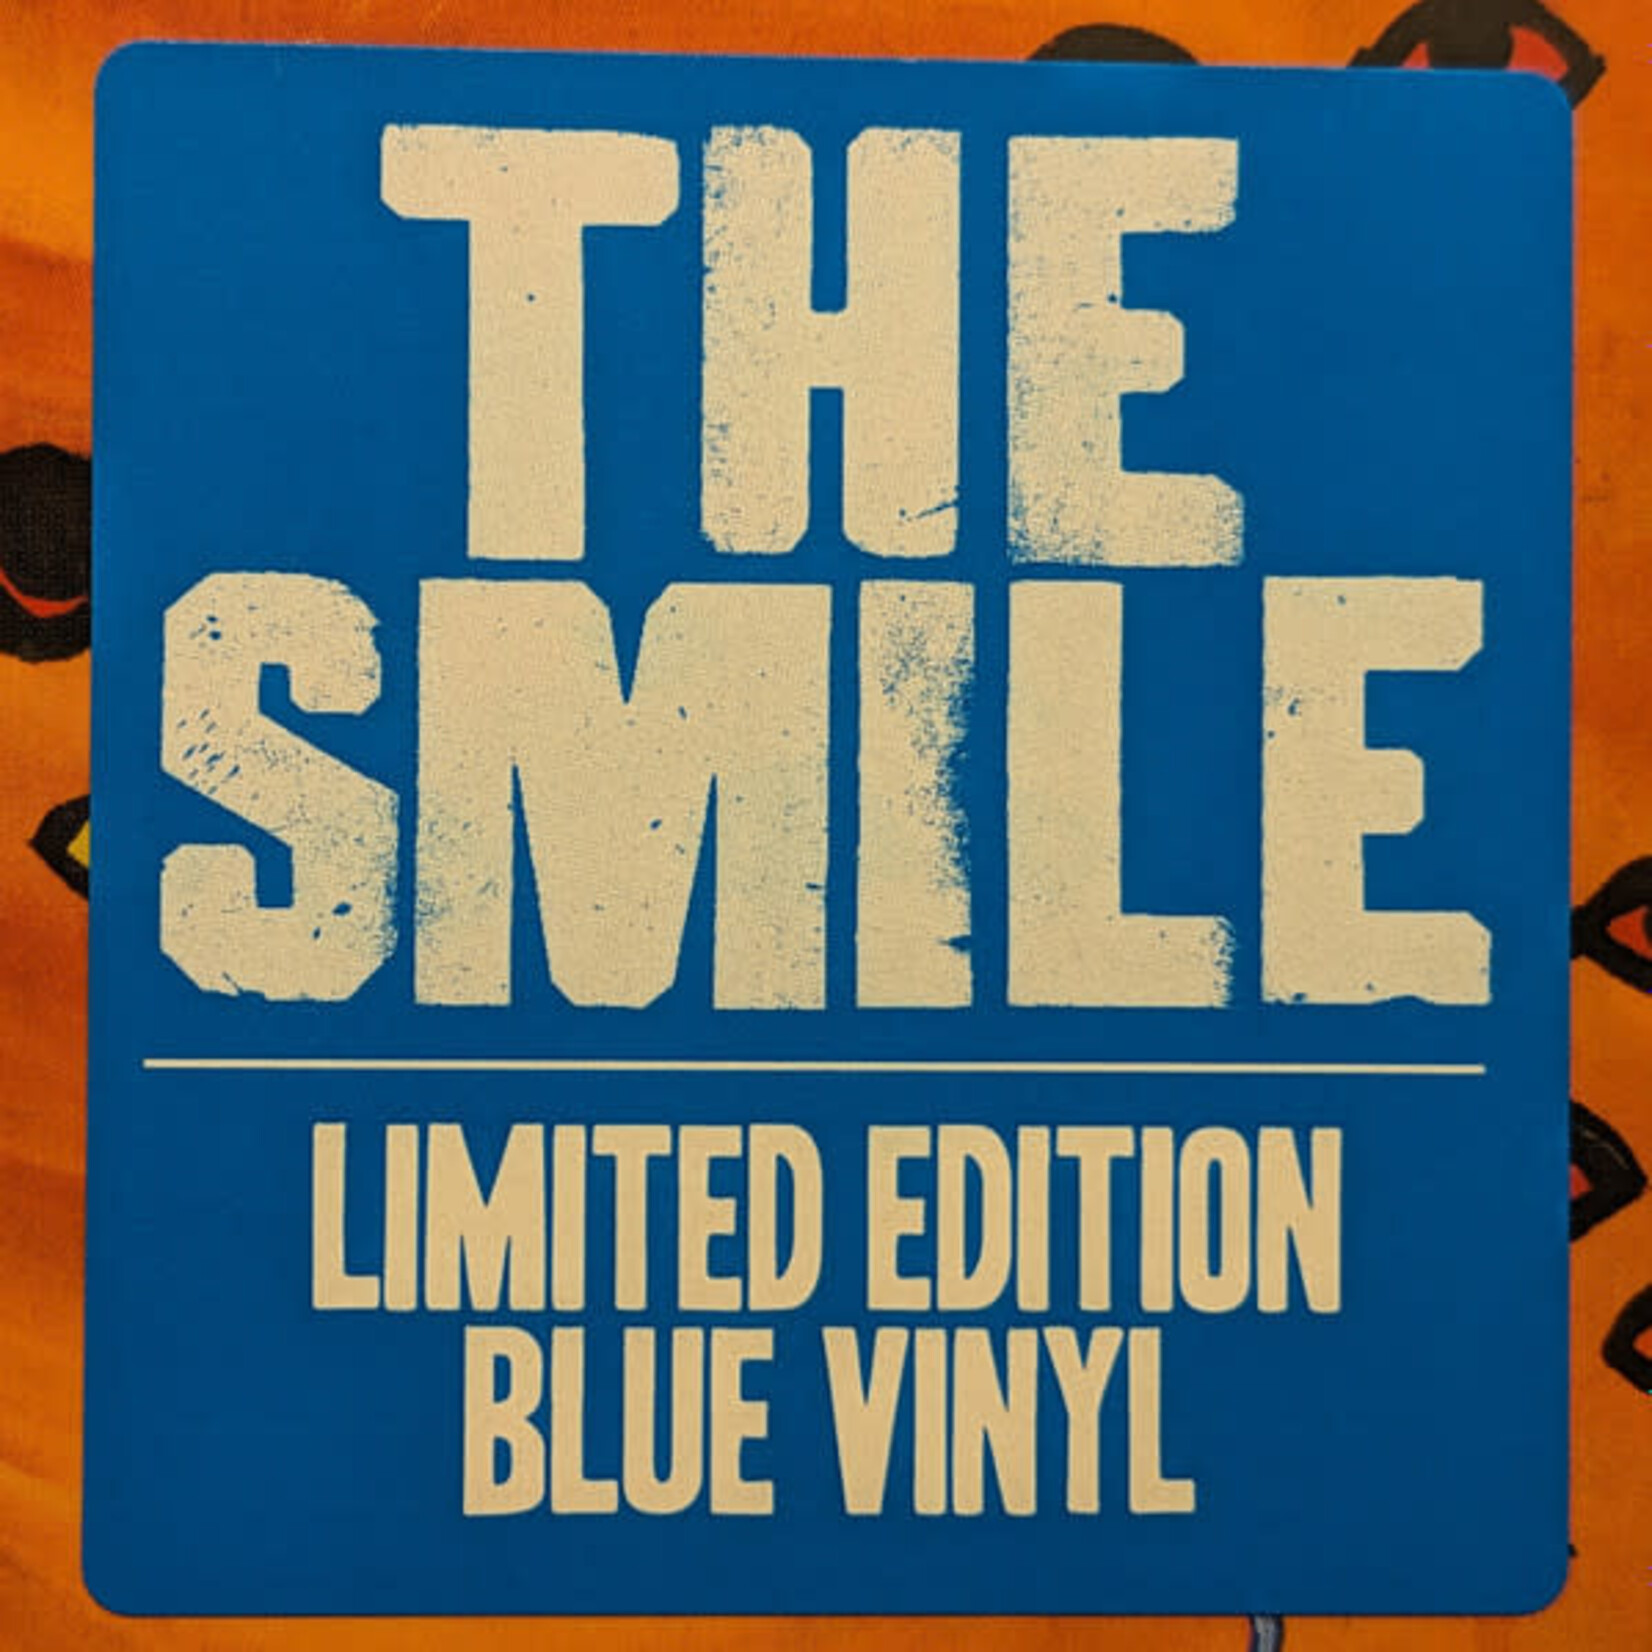 The Smile - Wall of Eyes (Indie Exclusive, Blue LP Vinyl) – Nail City Record